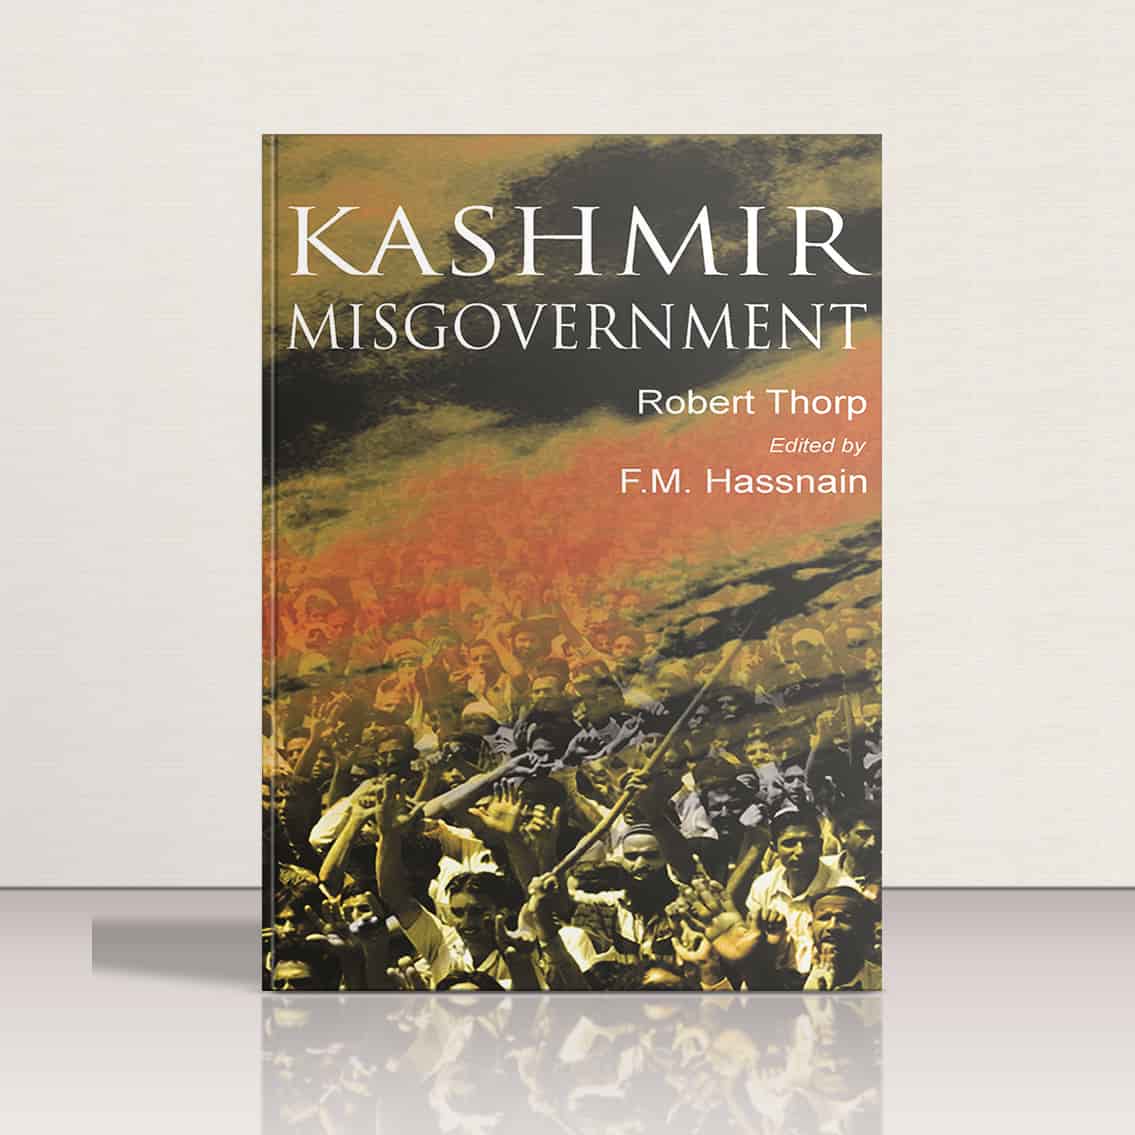 Kashmir Misgovernment by Robert Thorp